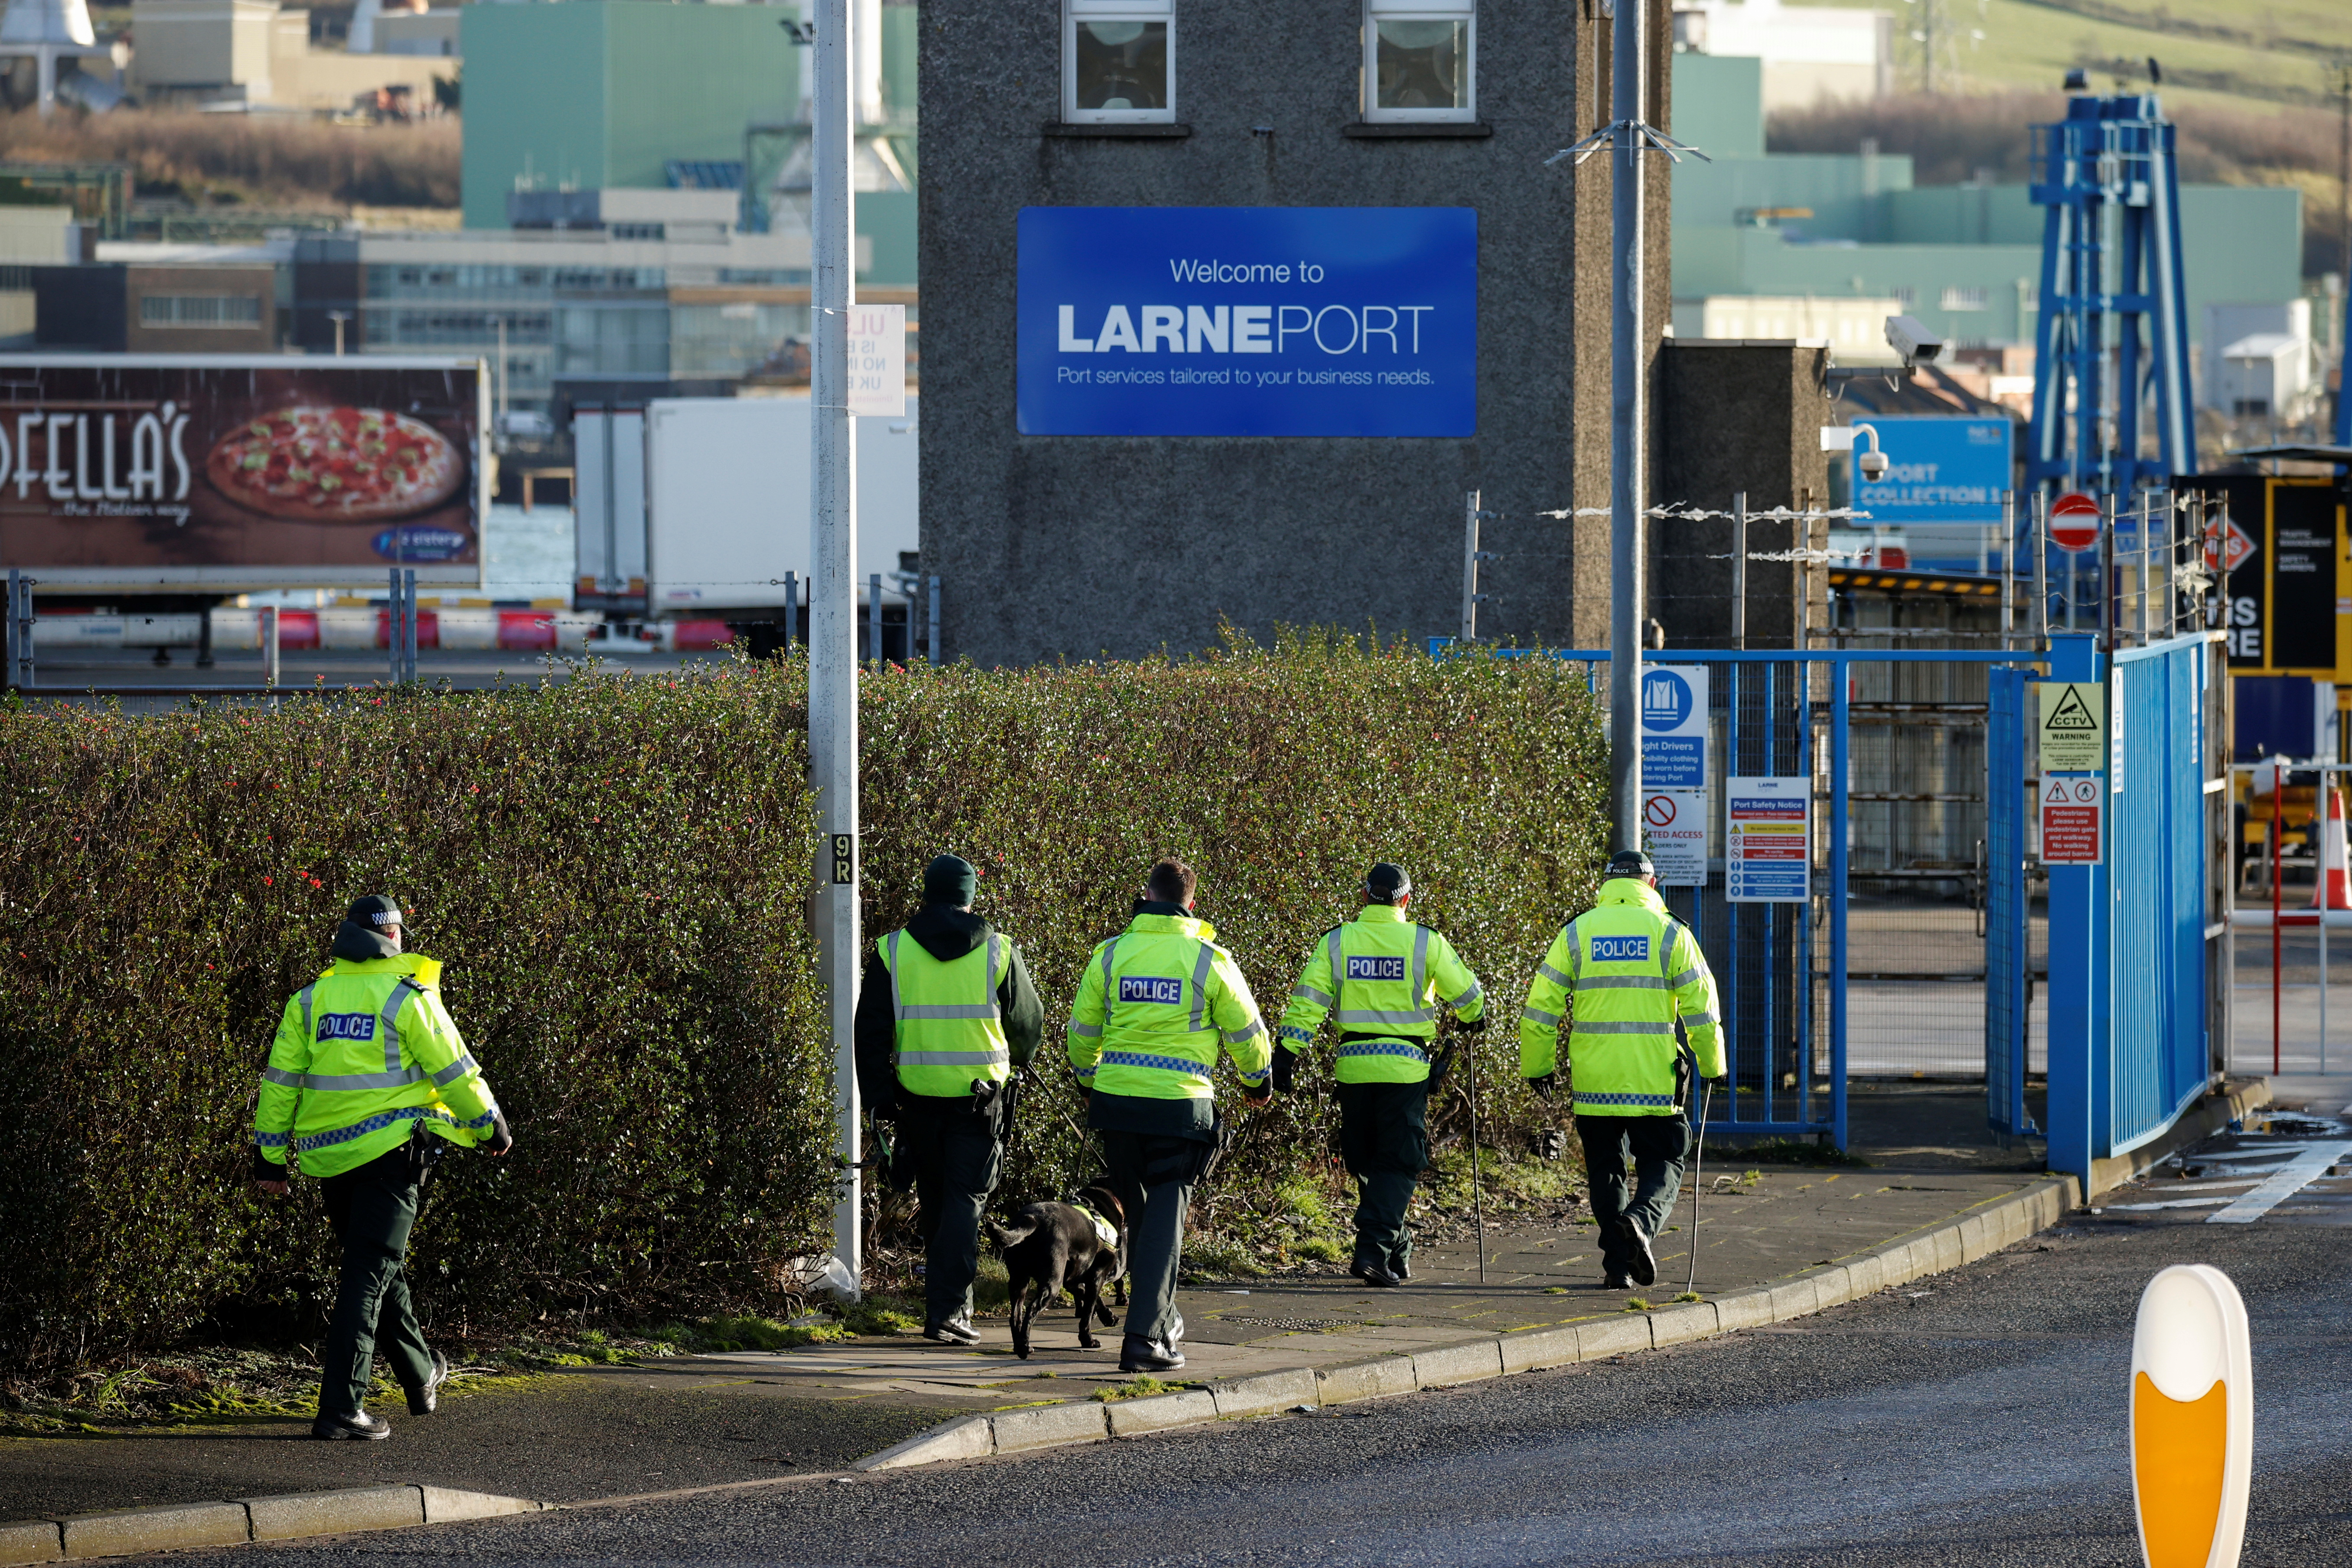 Police officers carry out a security sweep near the Port of Larne